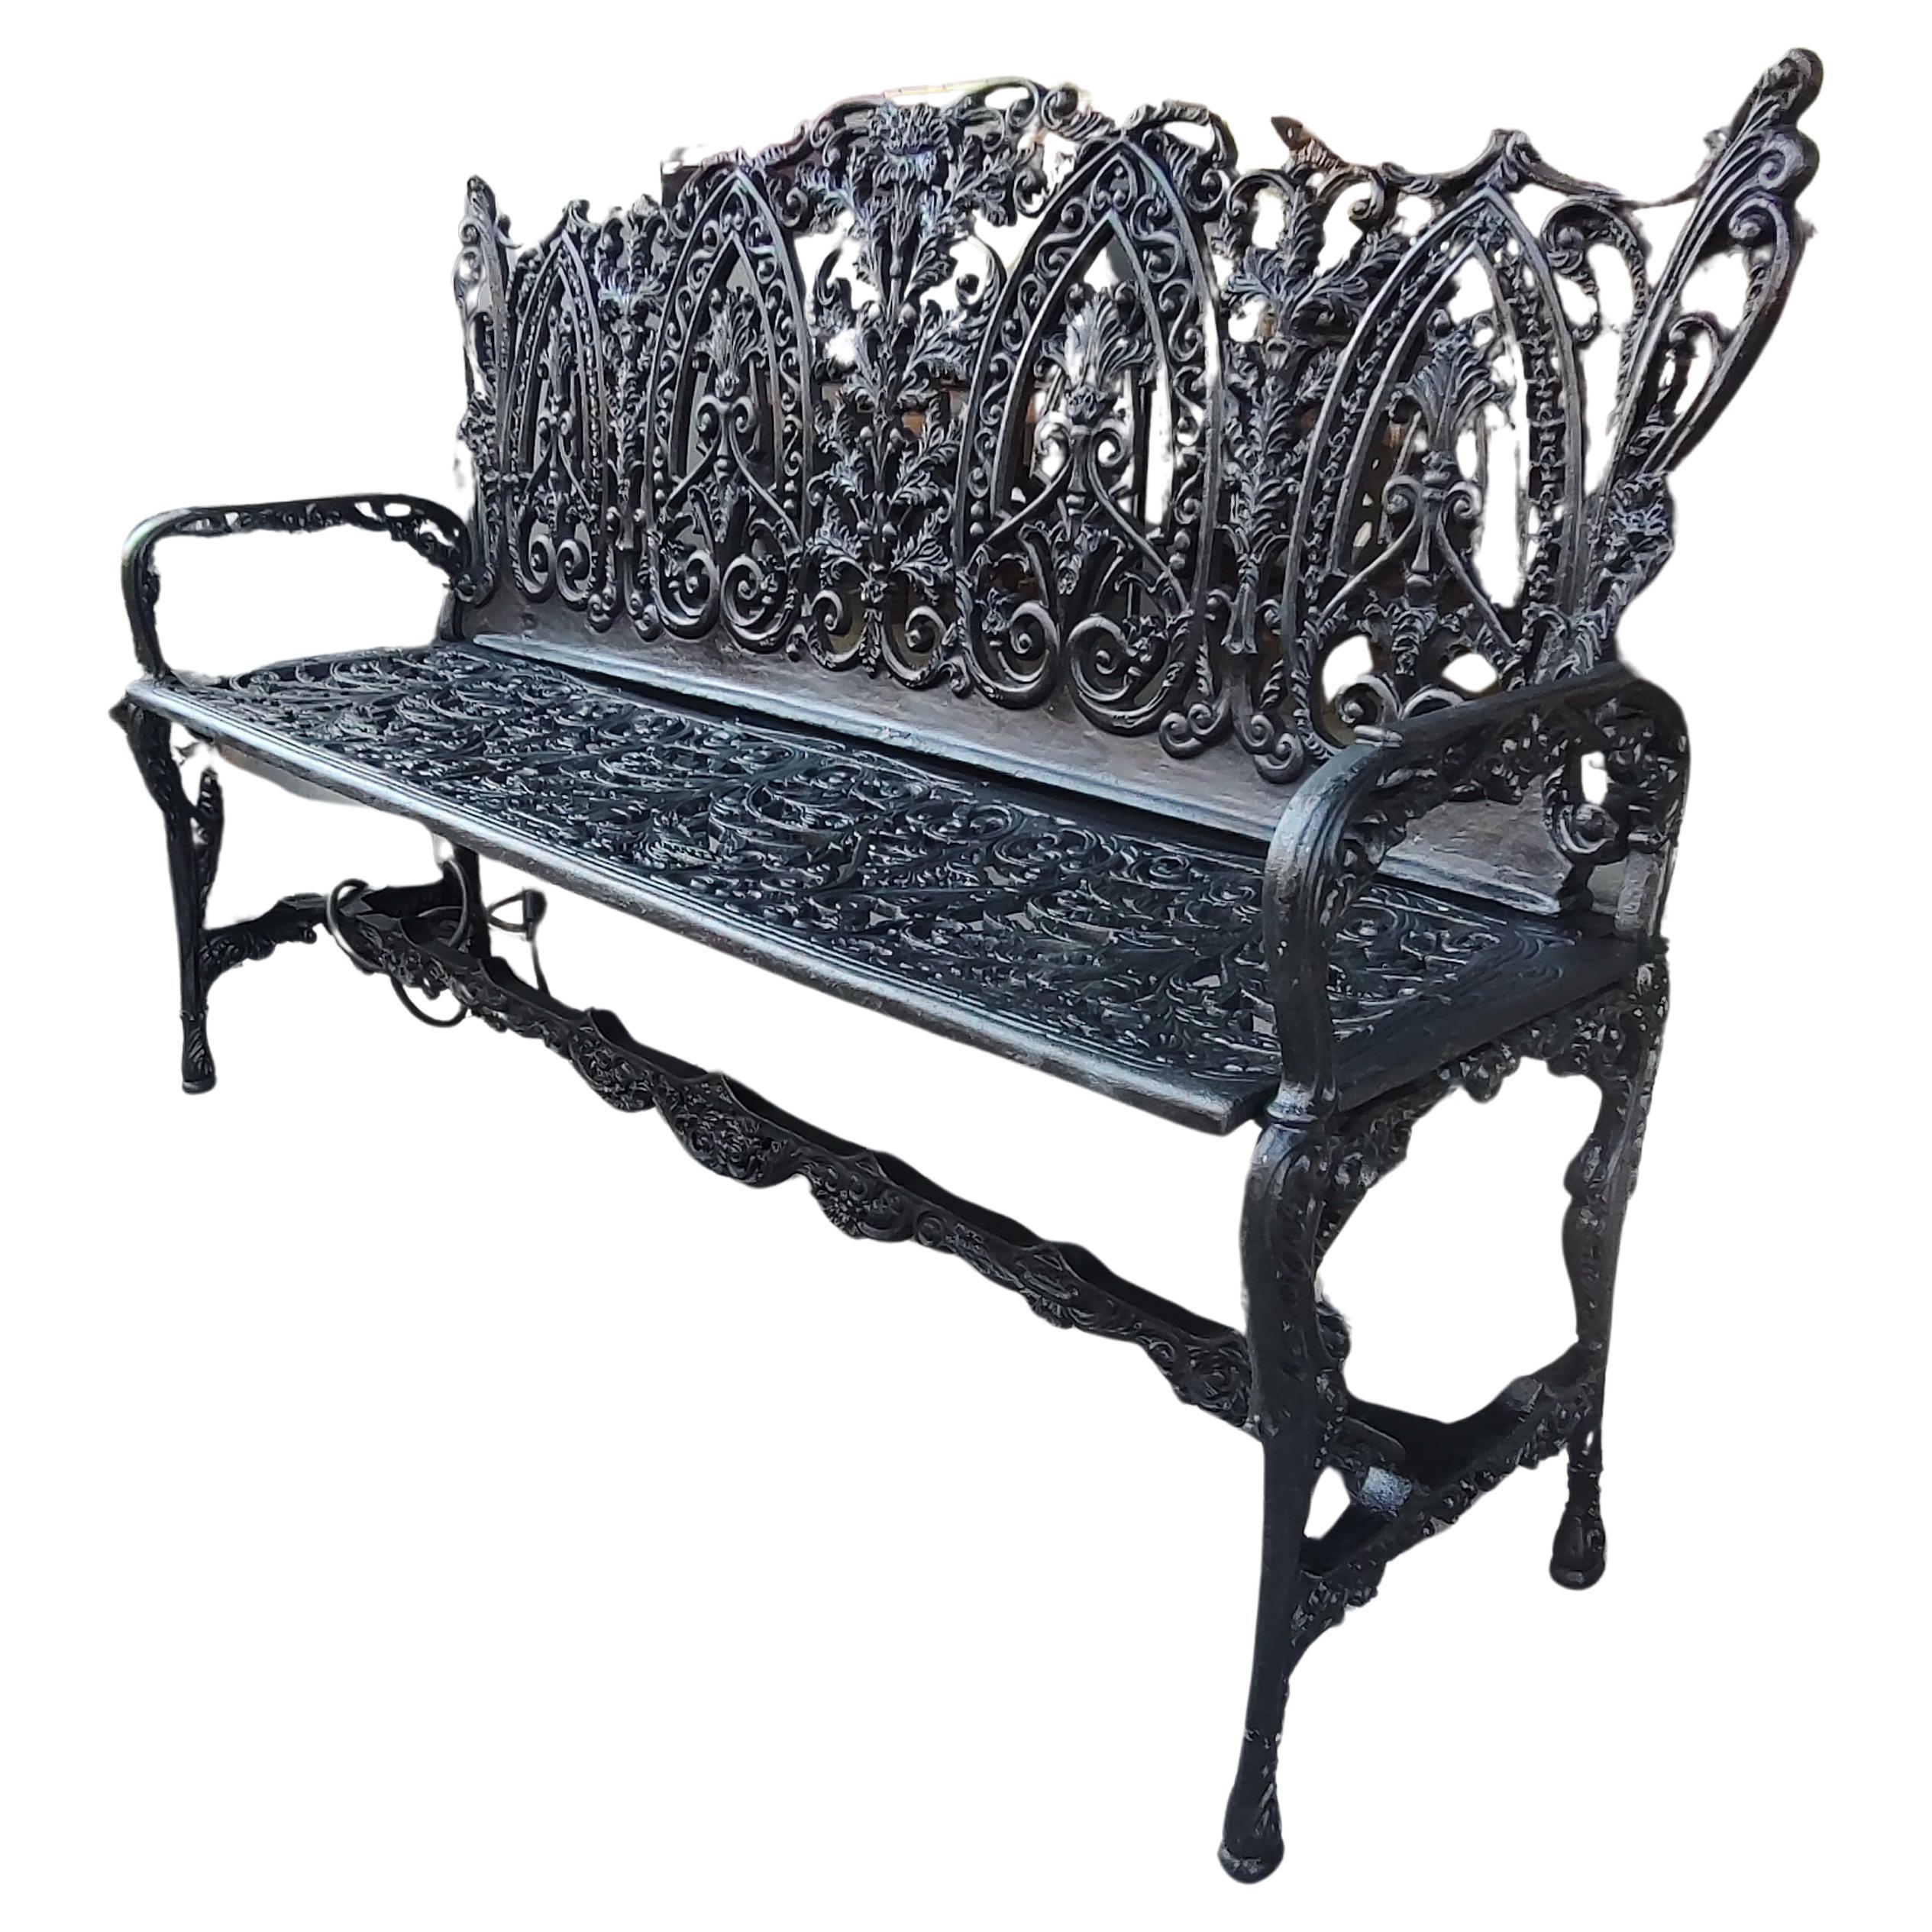 Large Cast Iron Garden Bench In The Style of Art Noveau Renaissance Revival  In Good Condition For Sale In Port Jervis, NY